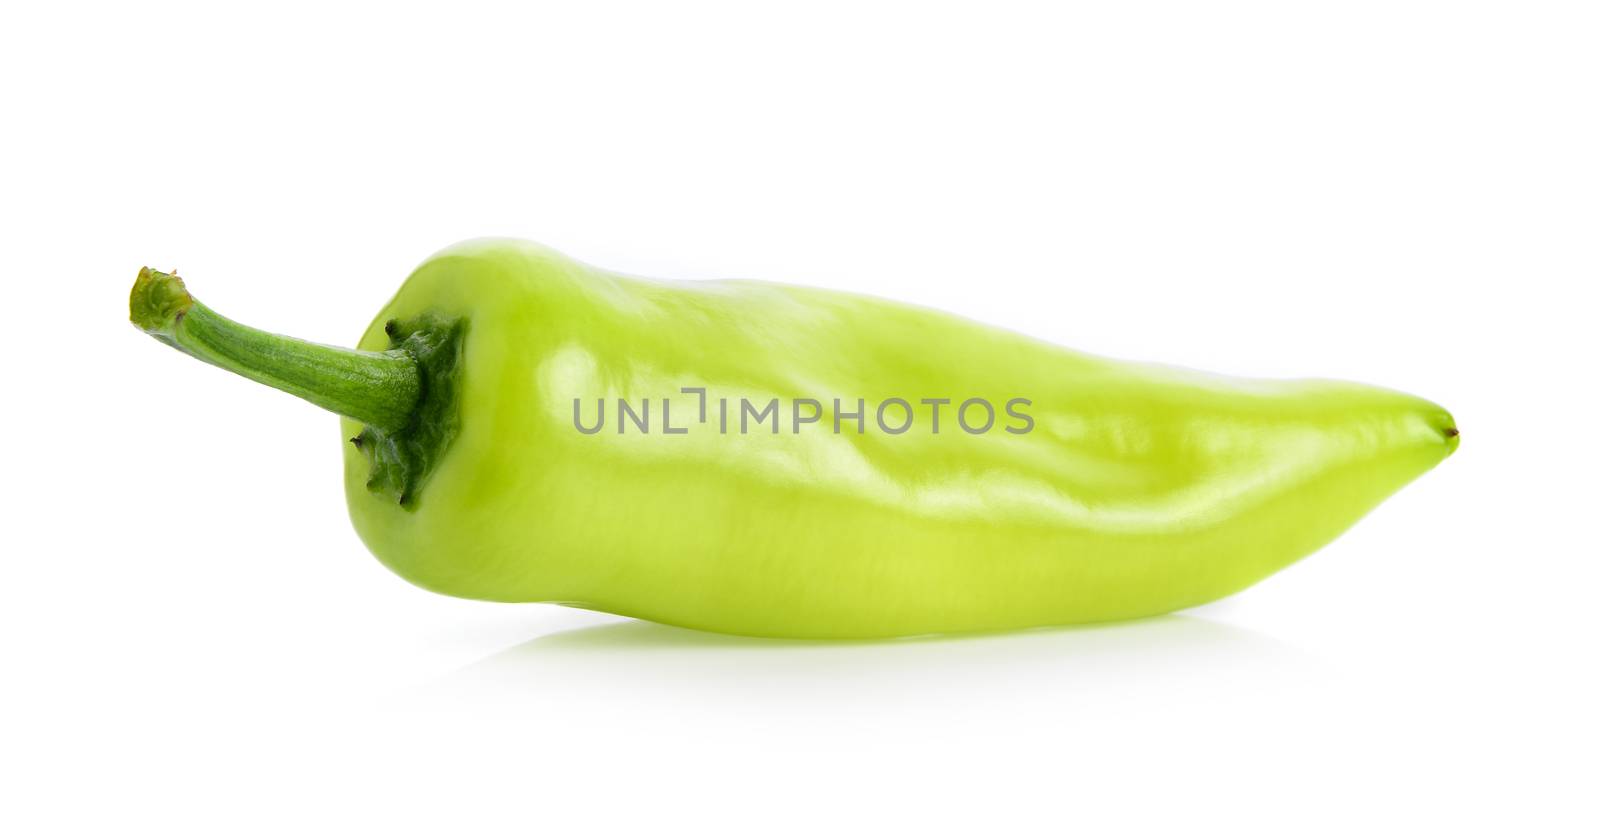 Green hot chili pepper isolated on the white background.